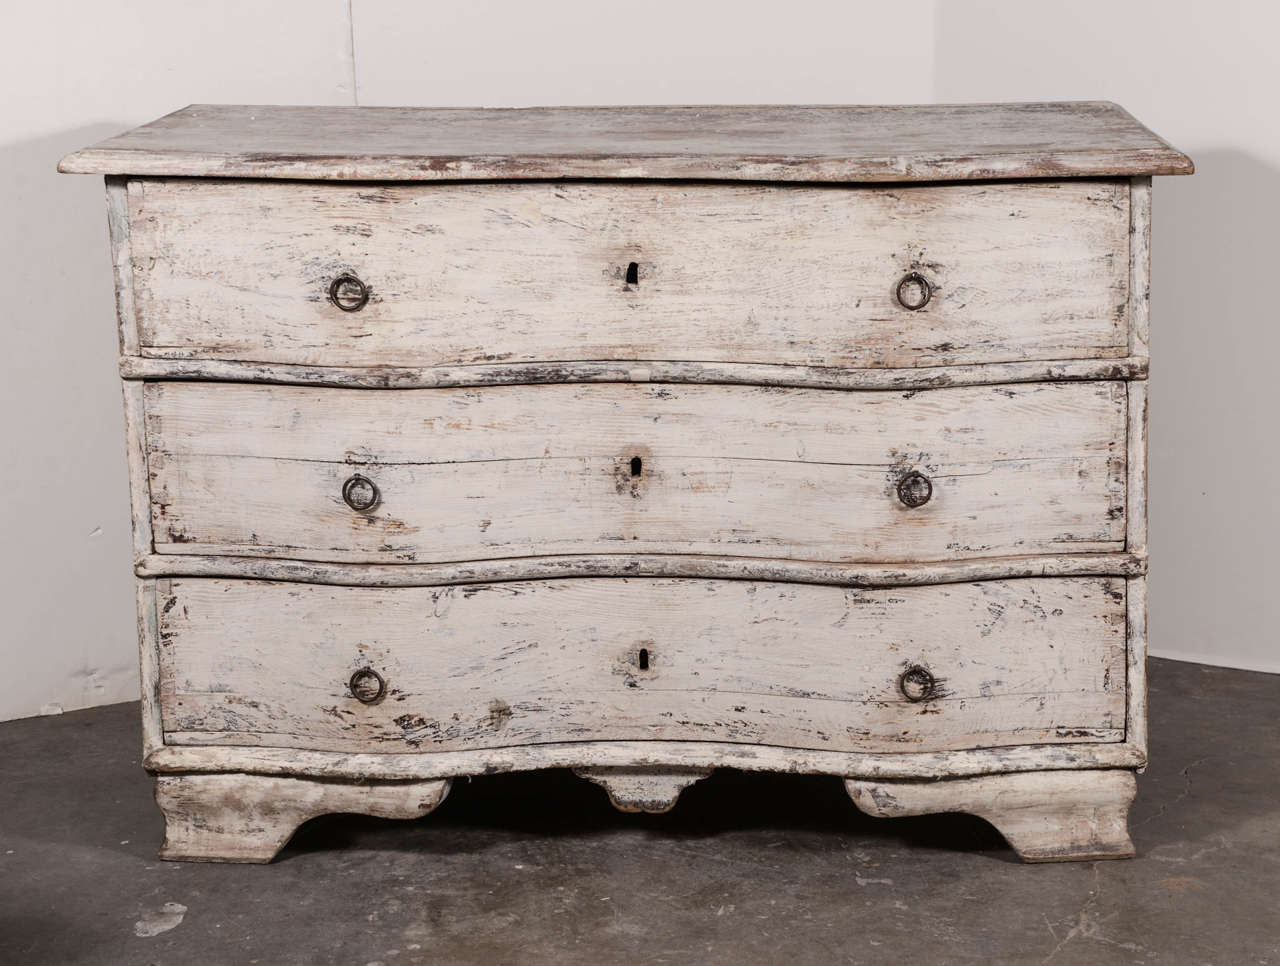 This has a really pretty shape with its curved wood drawers. Imported from Sweden it's from the late 18th century and has refreshed paint over the original.